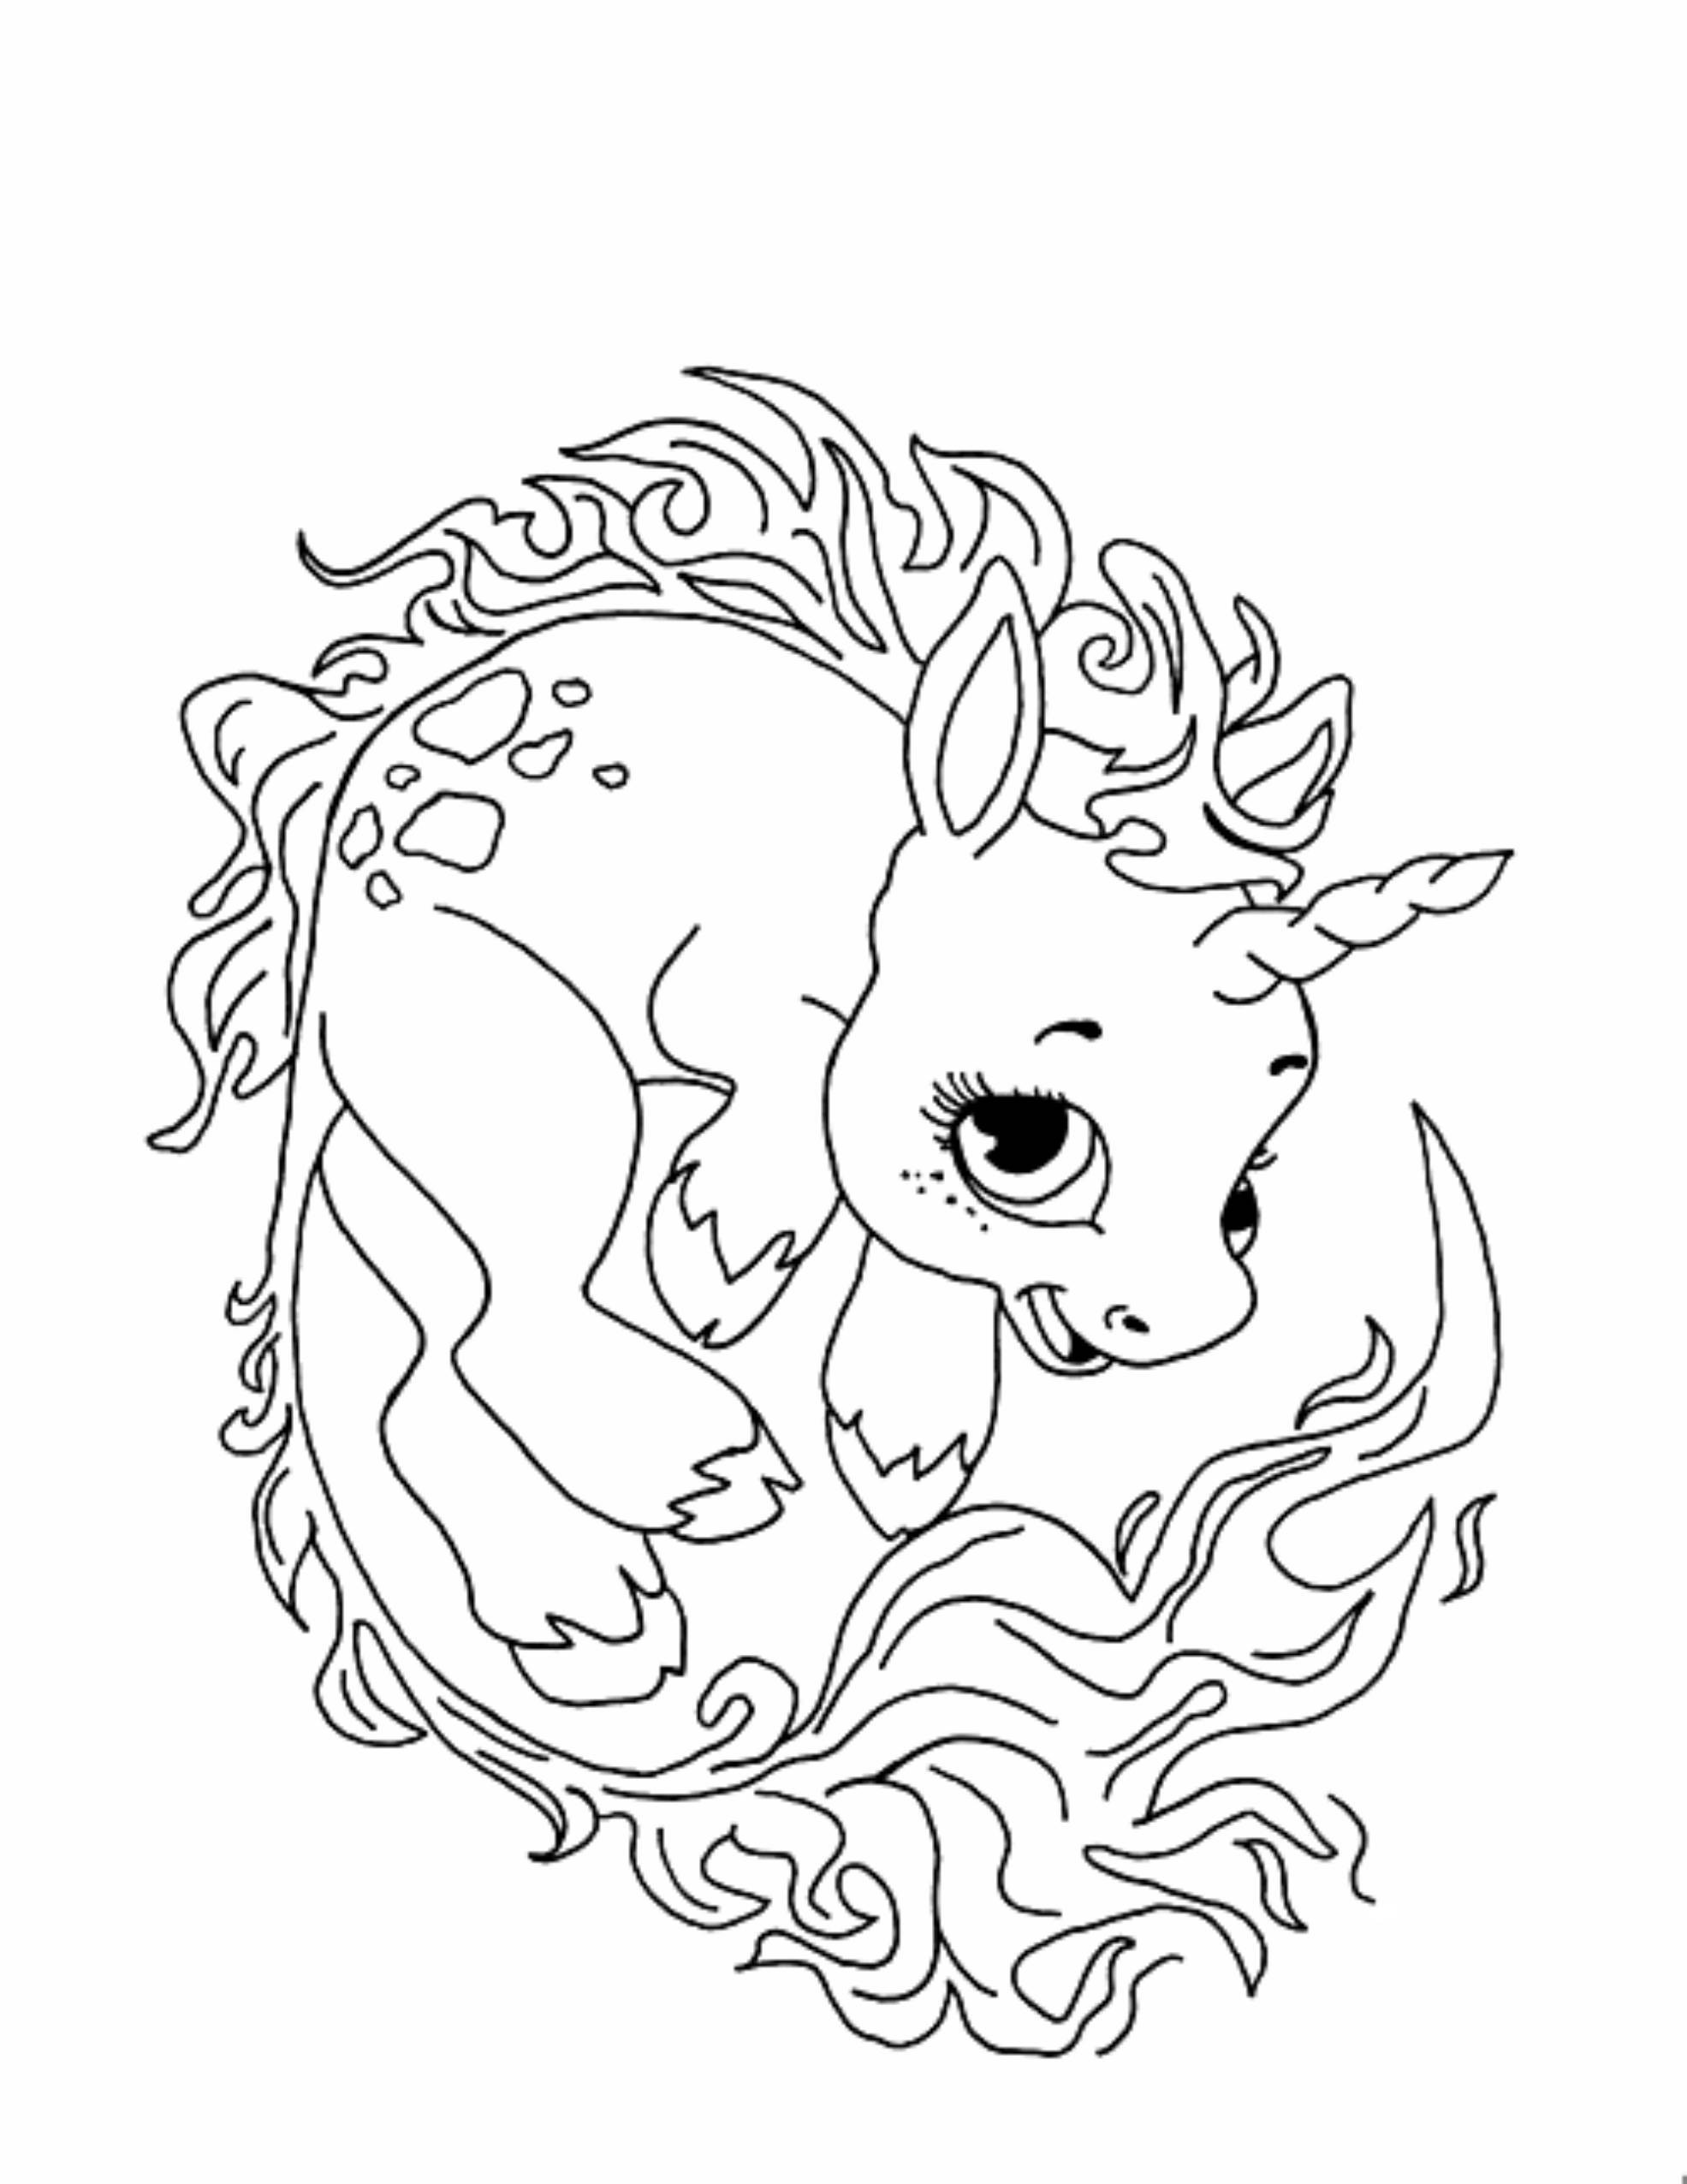 Unicorn Coloring Page for Kids Wallpaper